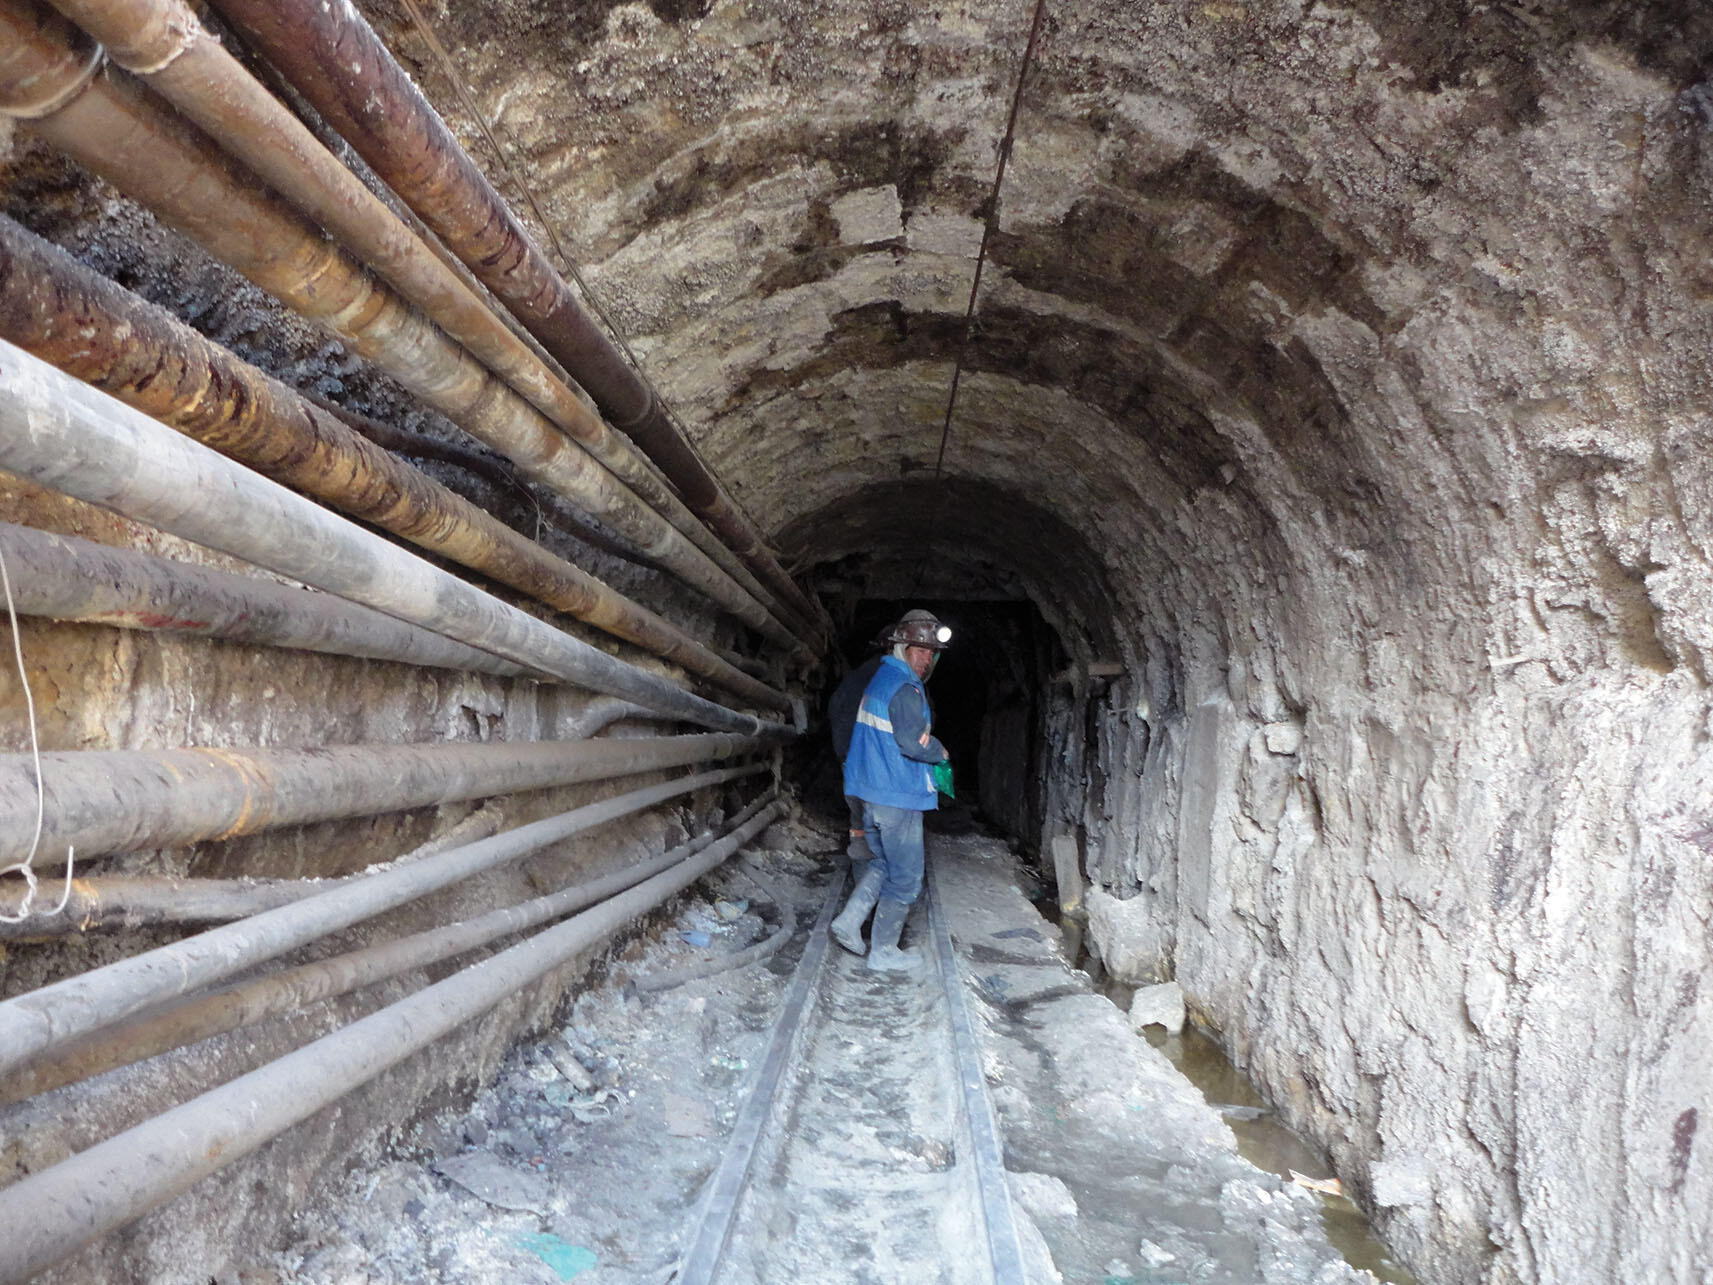 A miner heads below ground into the tunnels of the mine at the beginning of a day’s work. (Photo by Andrea Marston.)